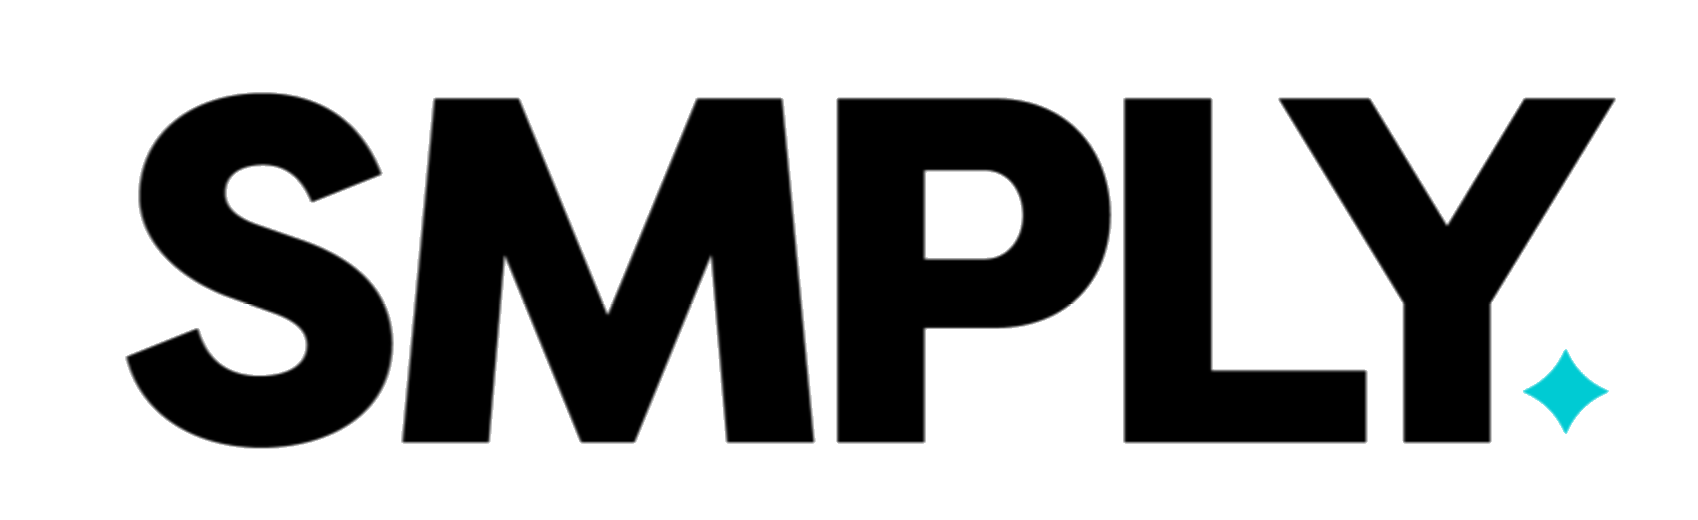 SMPLY Brands is a manufacturer and distributor of a wide variety of products including Made in the USA Dry Wipes, Wet Wipes, Mold prevention Products, Superstratum.  SMPLY is also a chemical sourcing, and contract manufacturer for major retail brands.